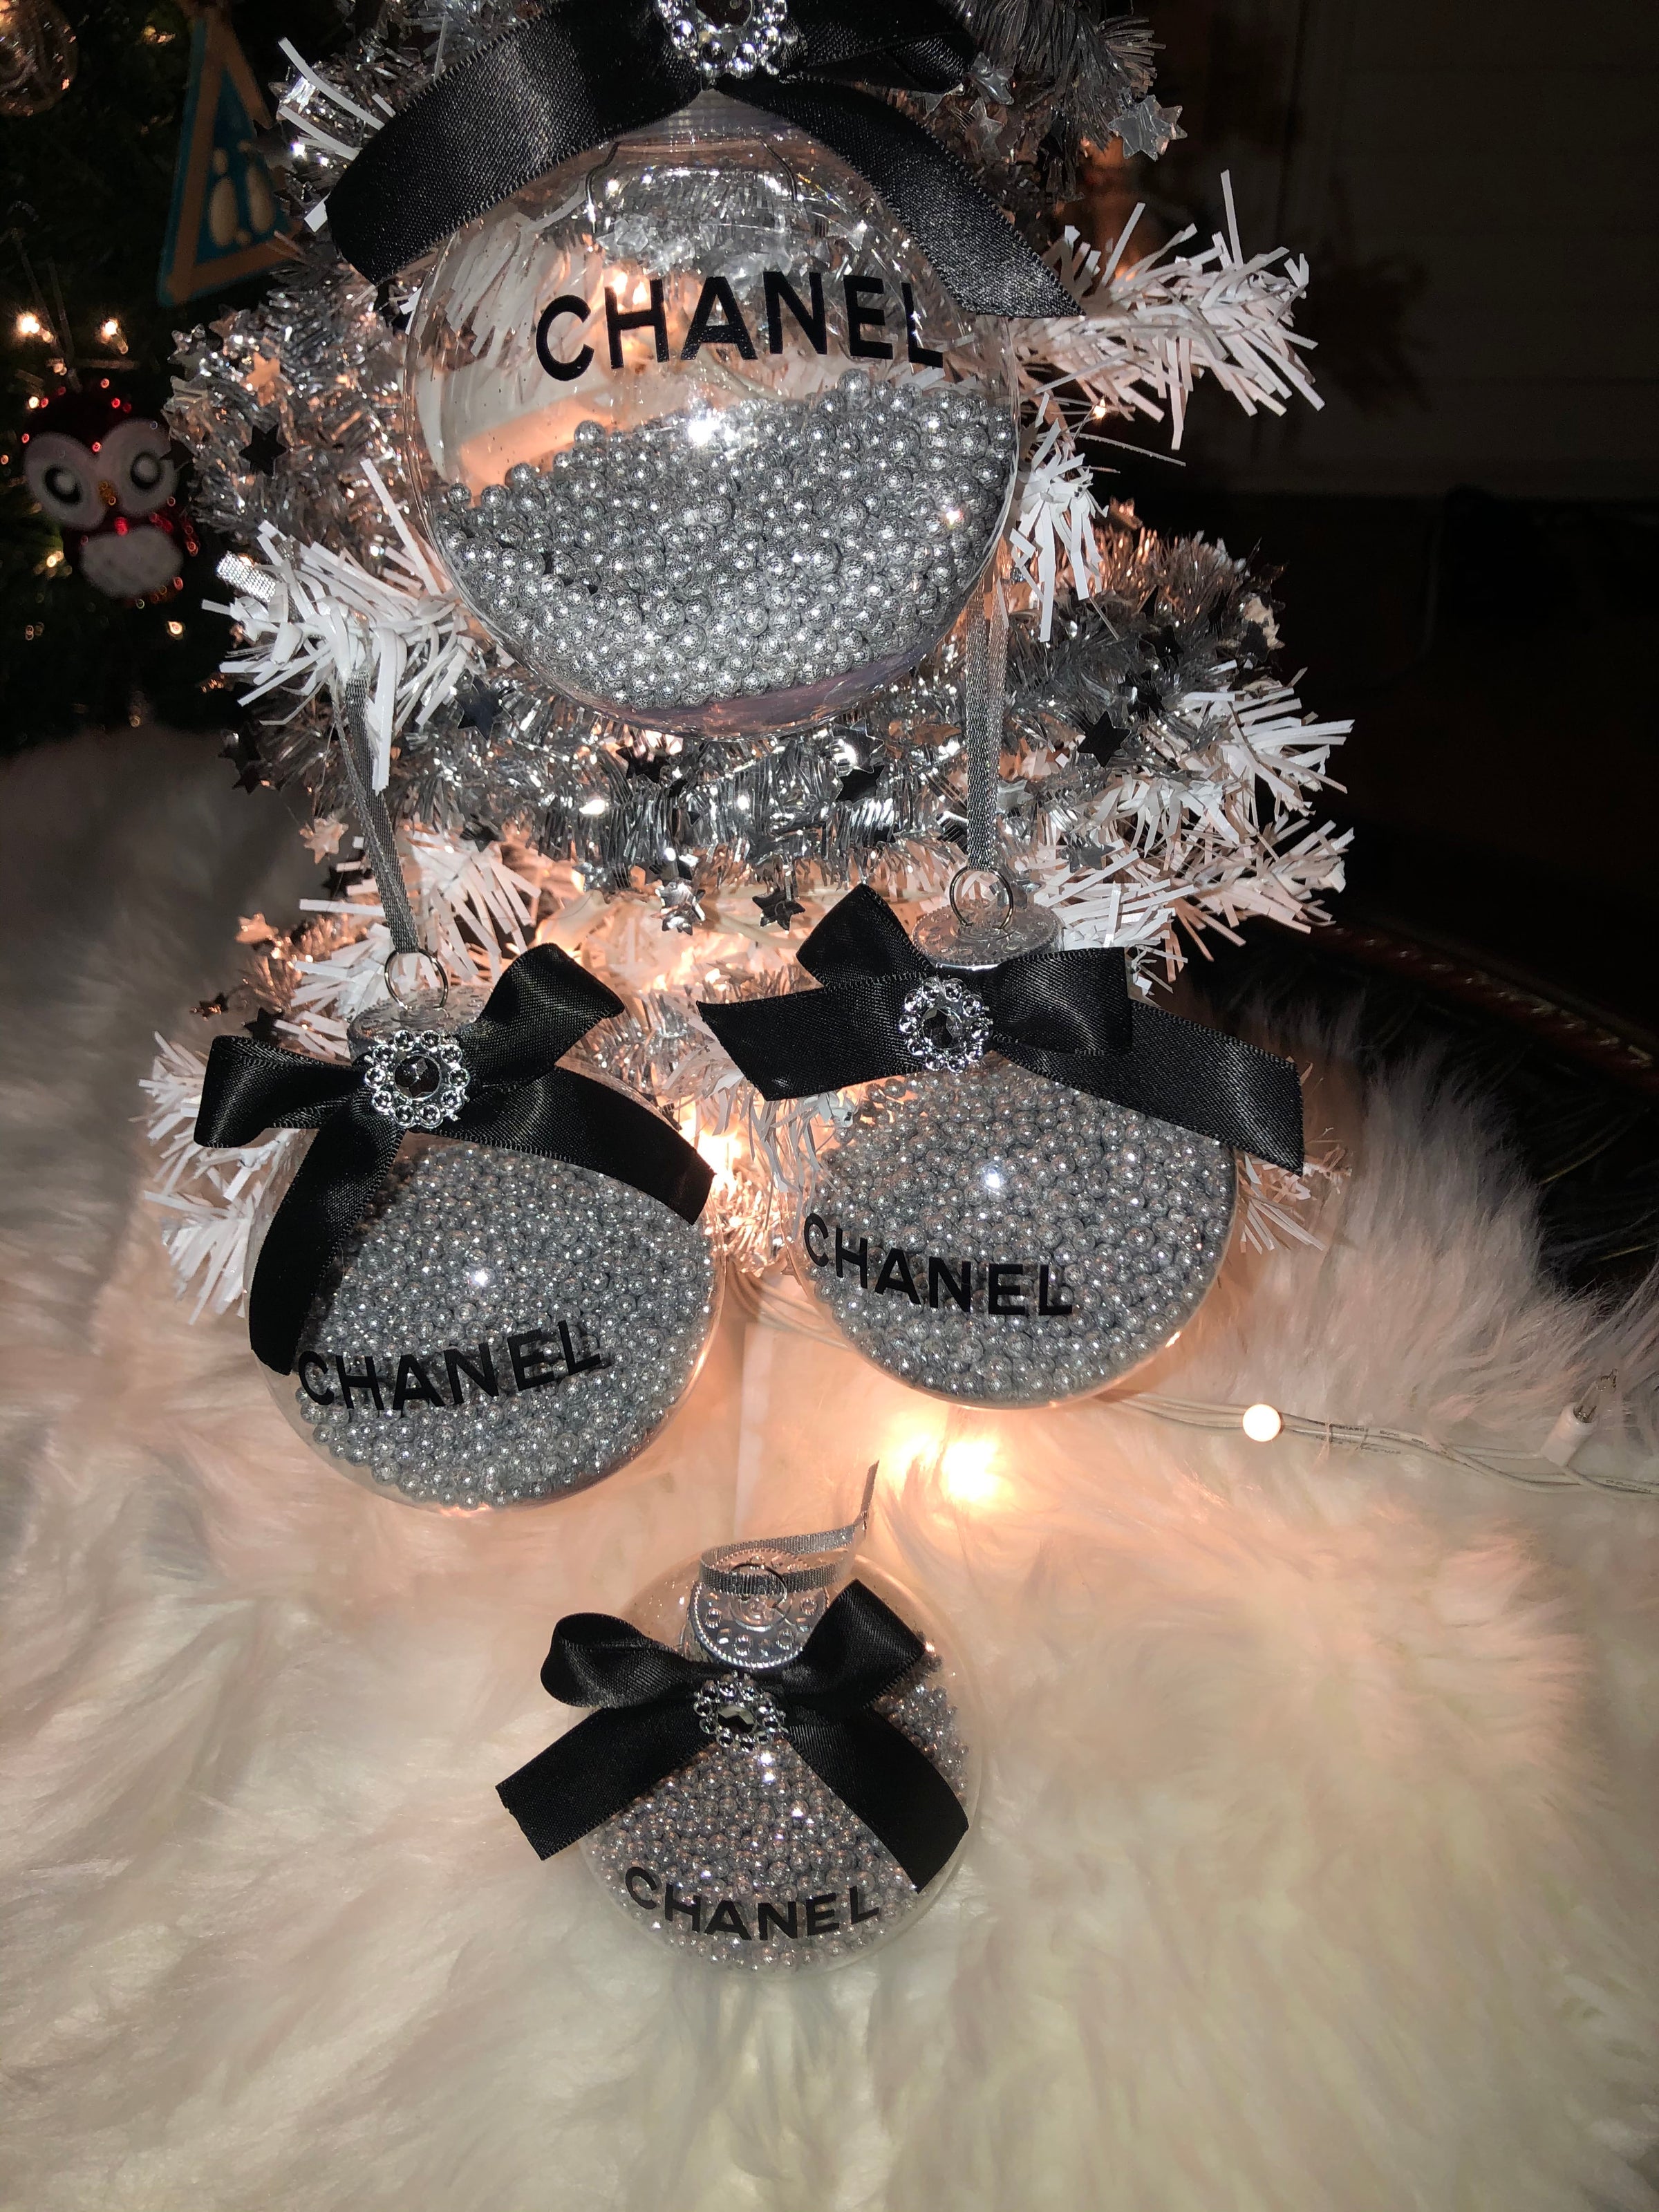 Chanel Inspired Ornaments